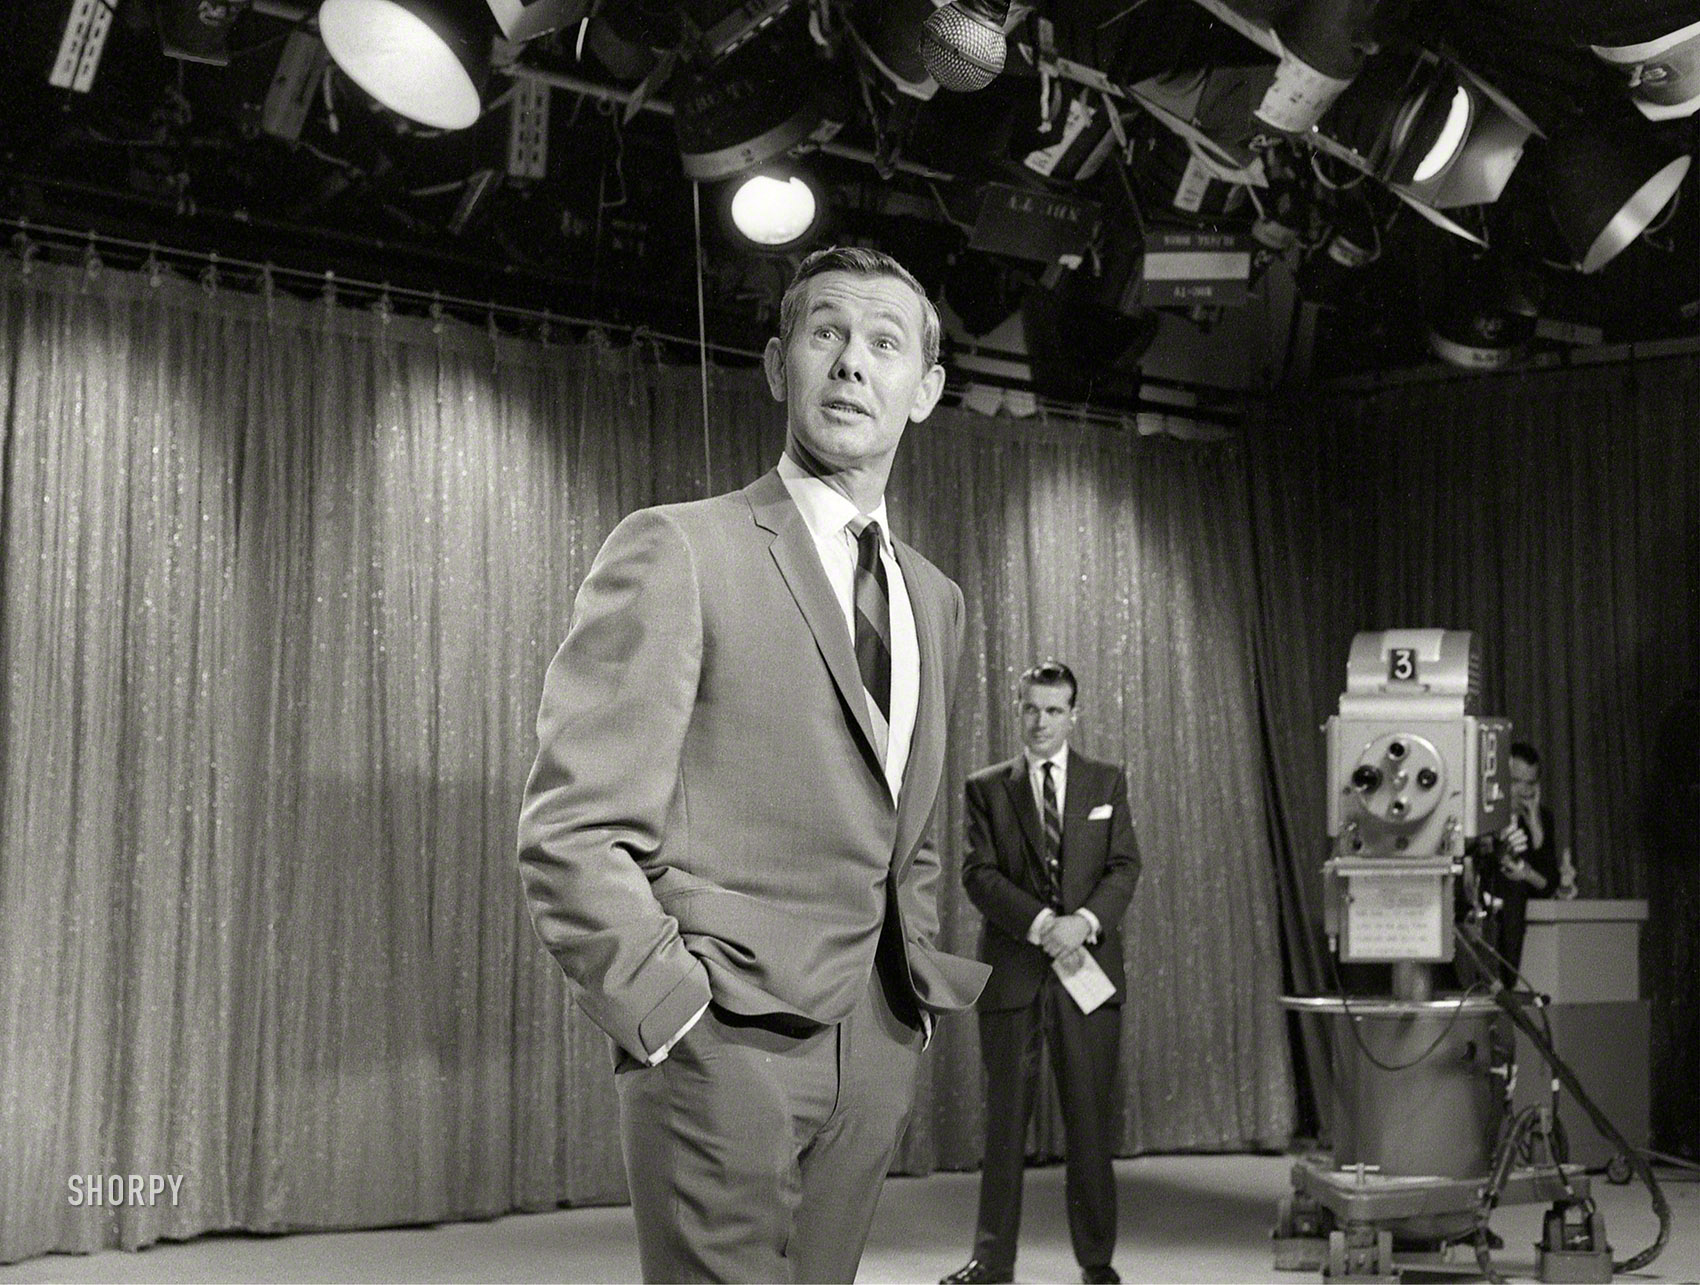 Los Angeles, July 1965. "Entertainer Johnny Carson on the 'Tonight' Show delivering a monologue." 35mm negative from photos for the Look magazine assignment "Johnny Carson, the prince of chitchat, is a loner." View full size.